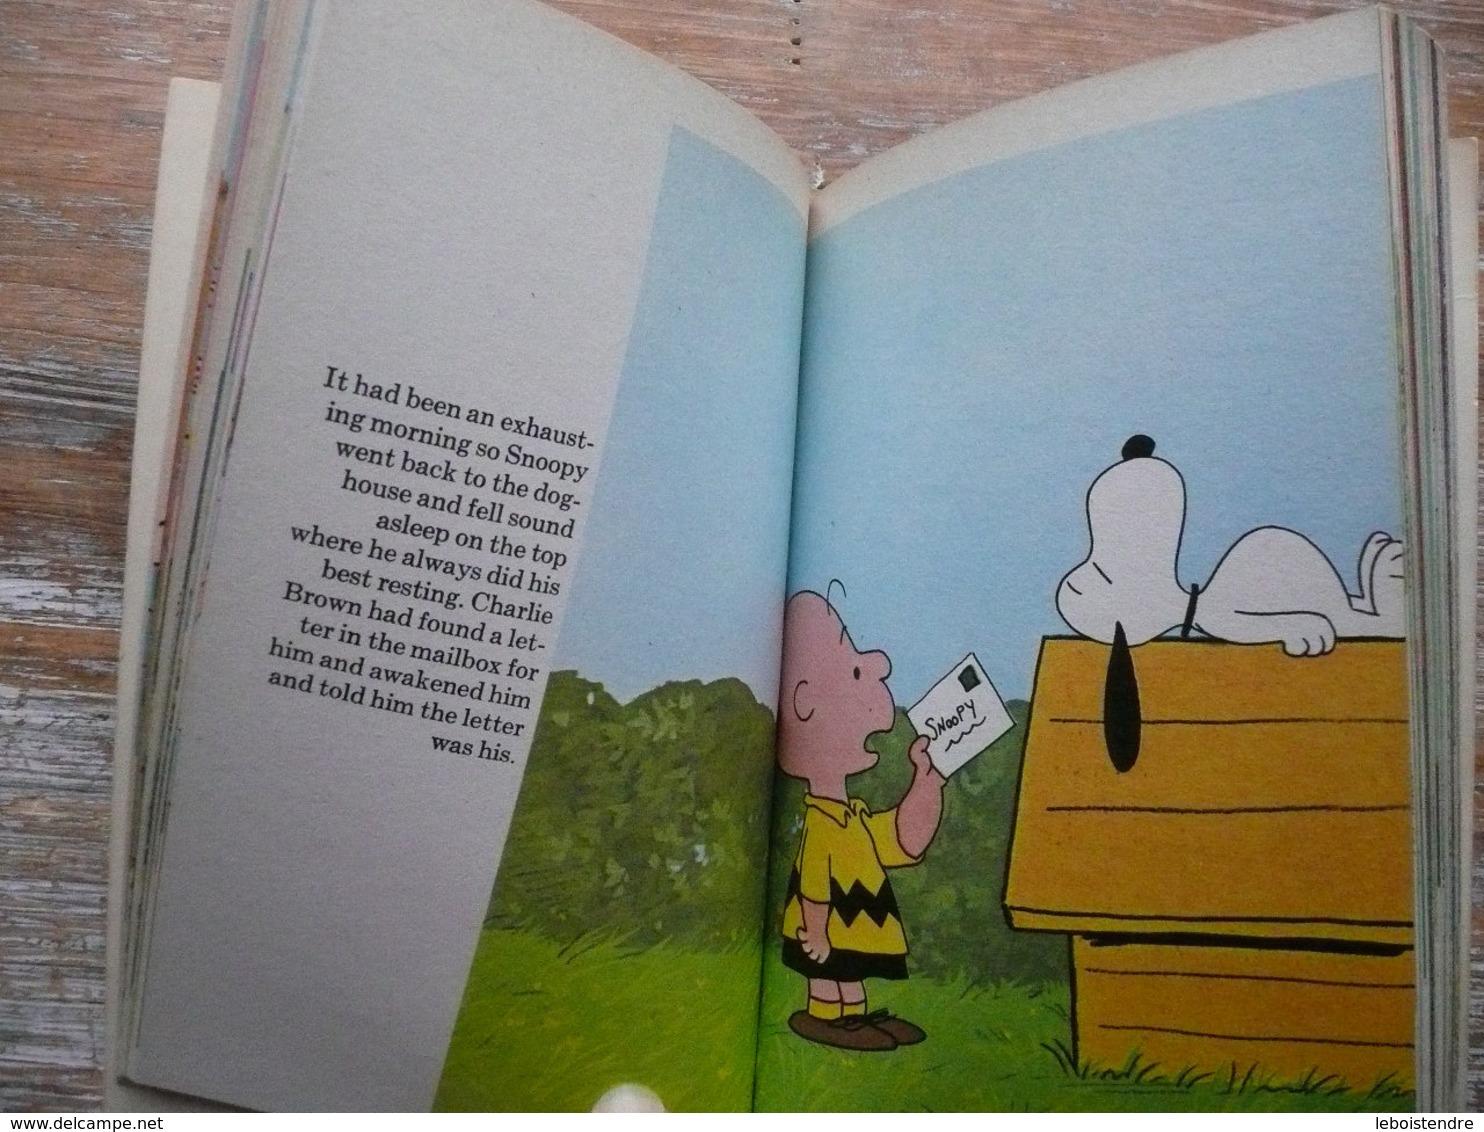 THE " SNOOPY COME HOME " MOVIE BOOK CHARLES M. SCHULZ A FAWCETT CREST BOOK 1972 - Popups